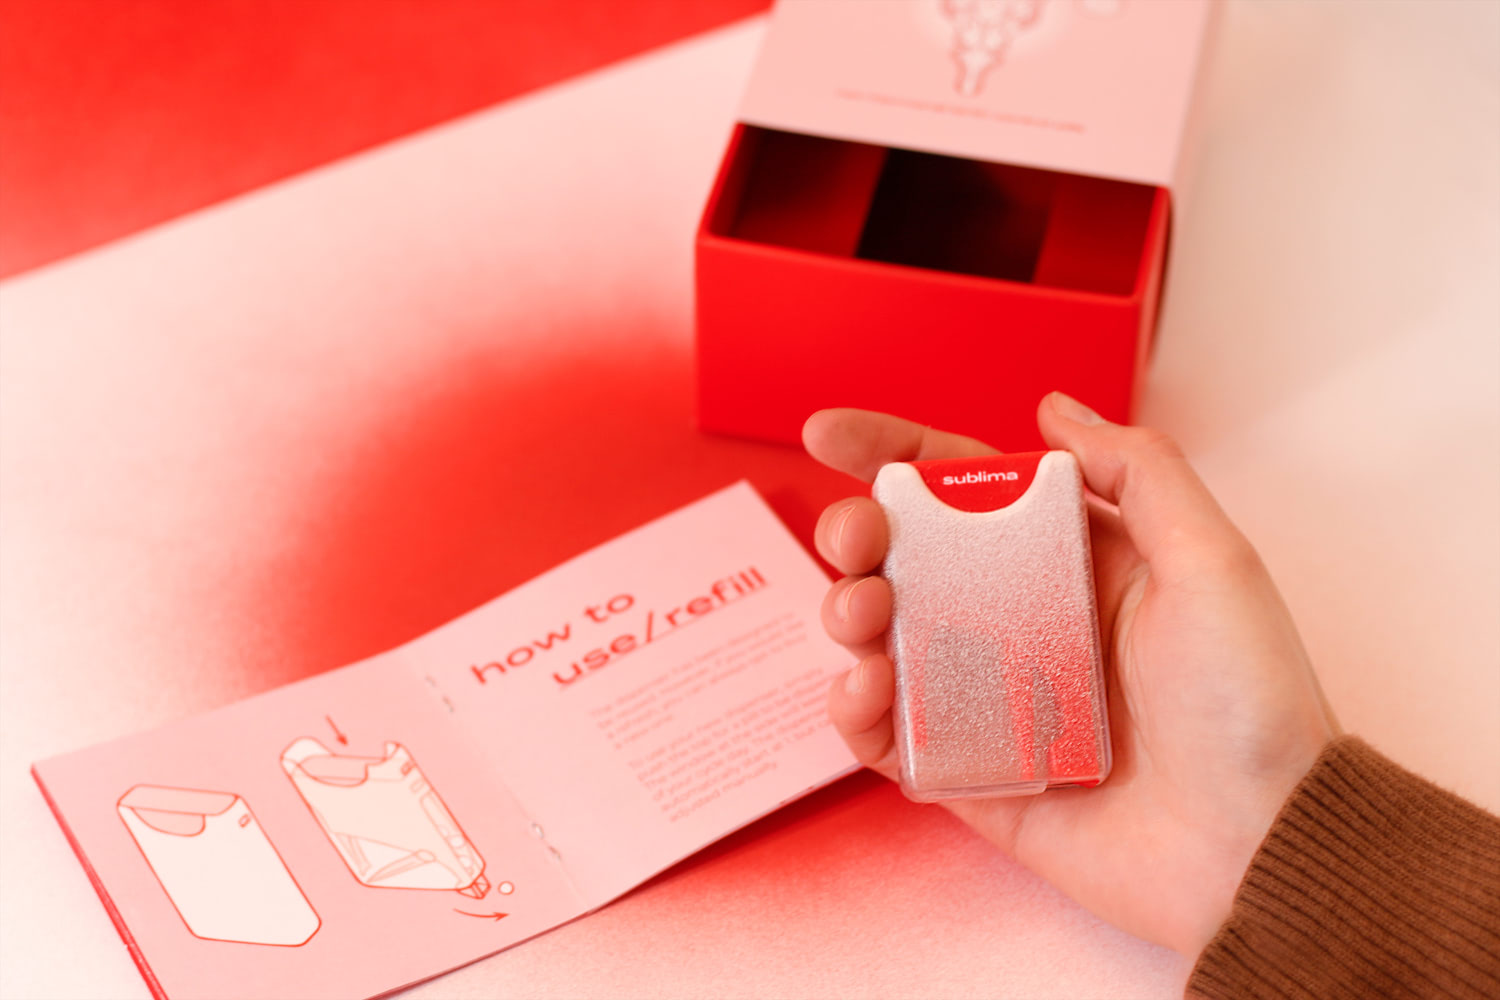 A photo showing the pill dispenser out of the packaging box and in the user's hand. The pill dispenser's exterior body is made out of a semi-transparent material featuring a gradient from light pink to white/transparent. The red interior body can be somewhat seen through the exterior body. The top button of the dispenser, where the user would push for a pill, has the company name 